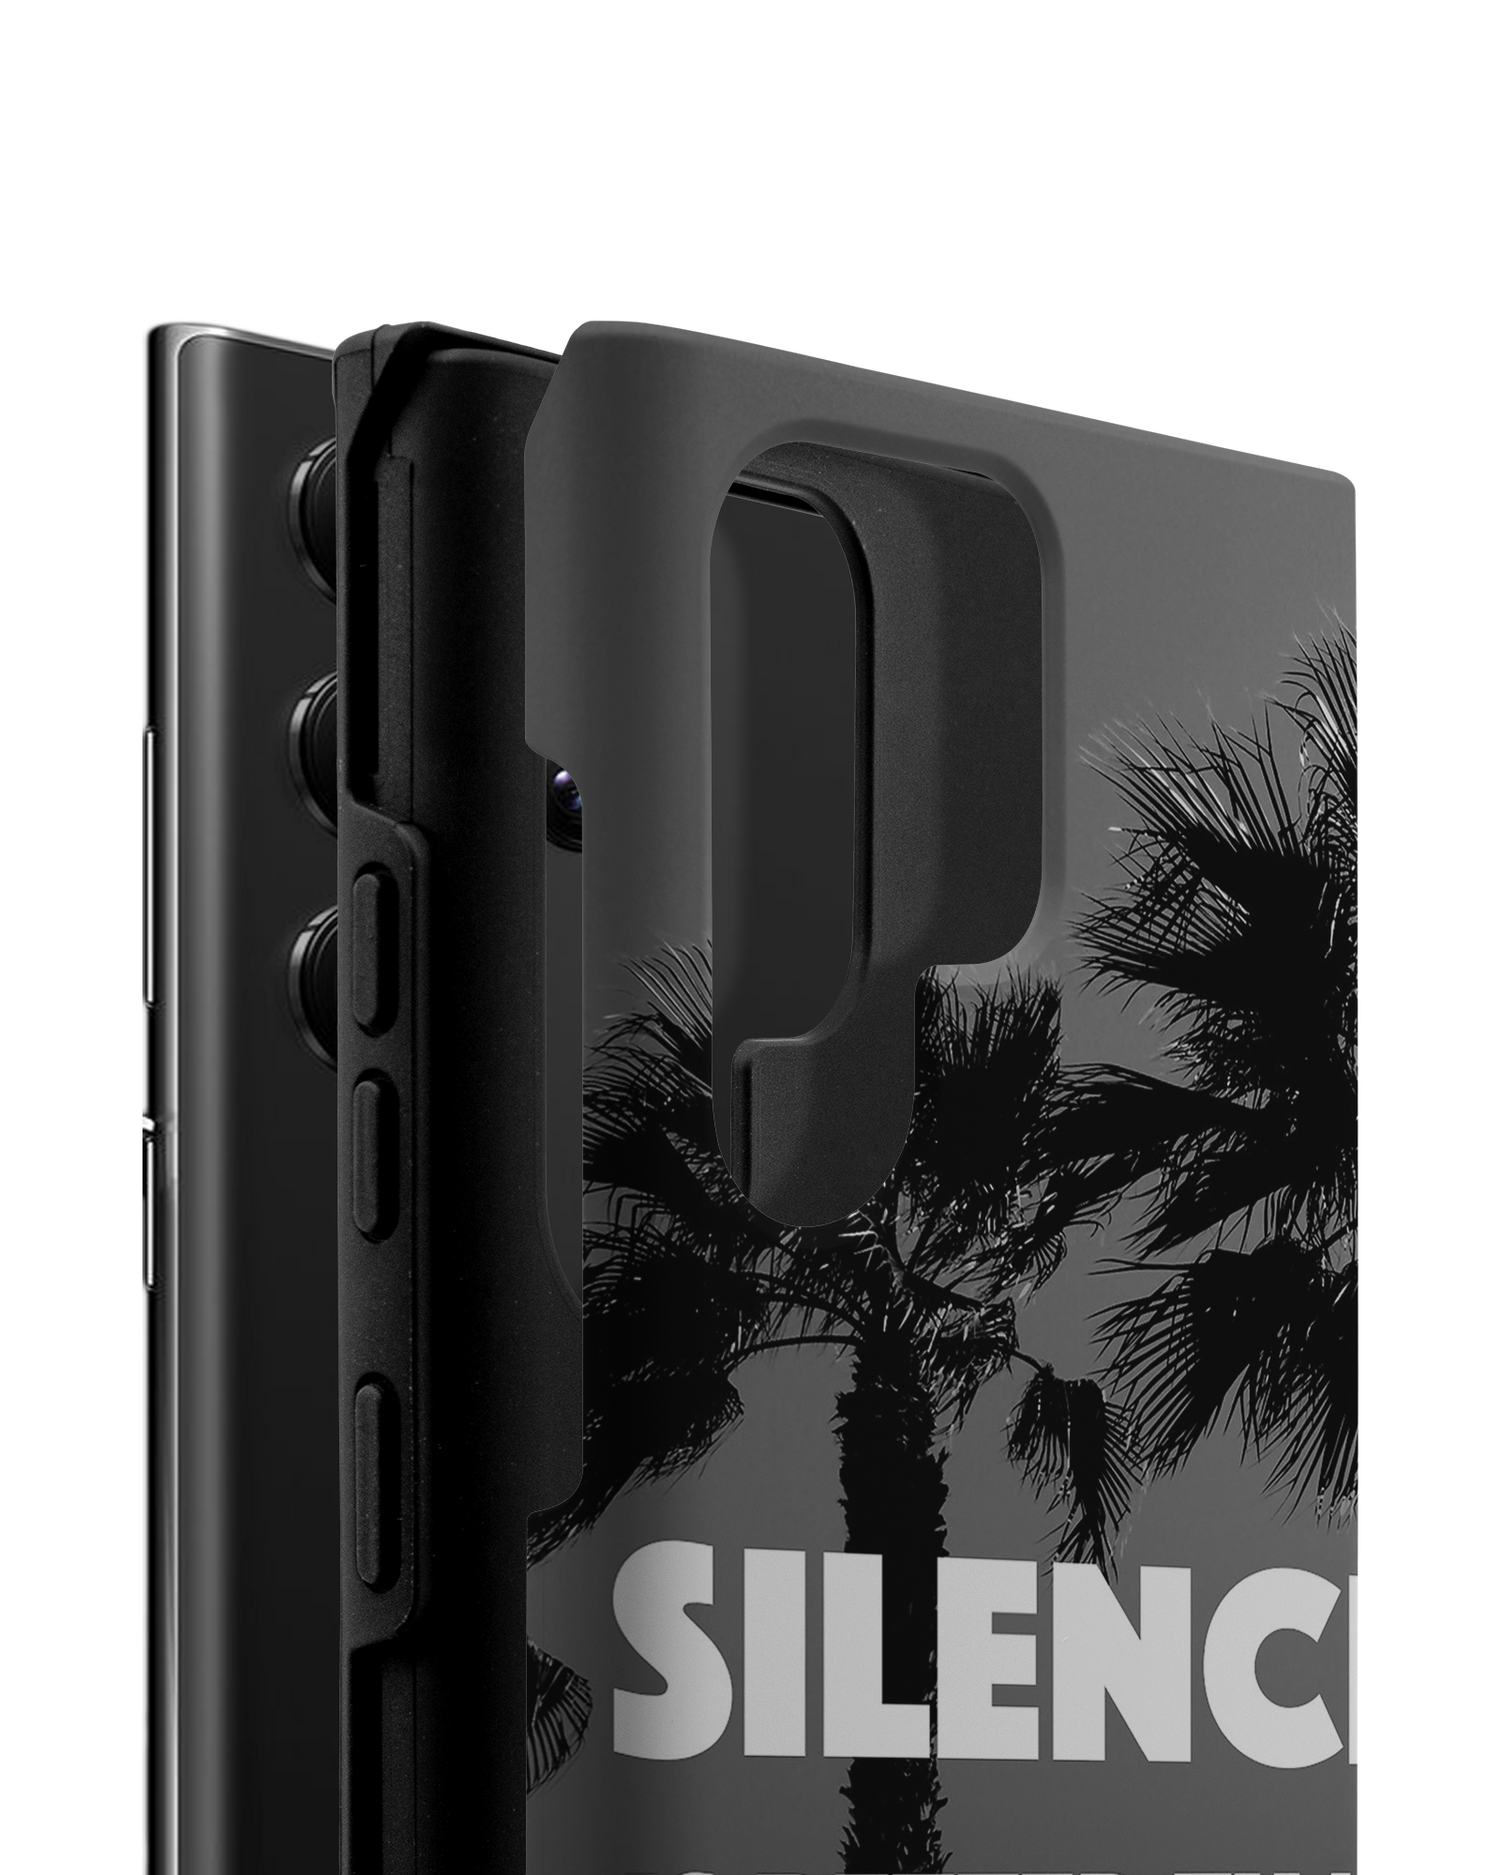 Silence is Better Premium Phone Case Samsung Galaxy S22 Ultra 5G consisting of 2 parts